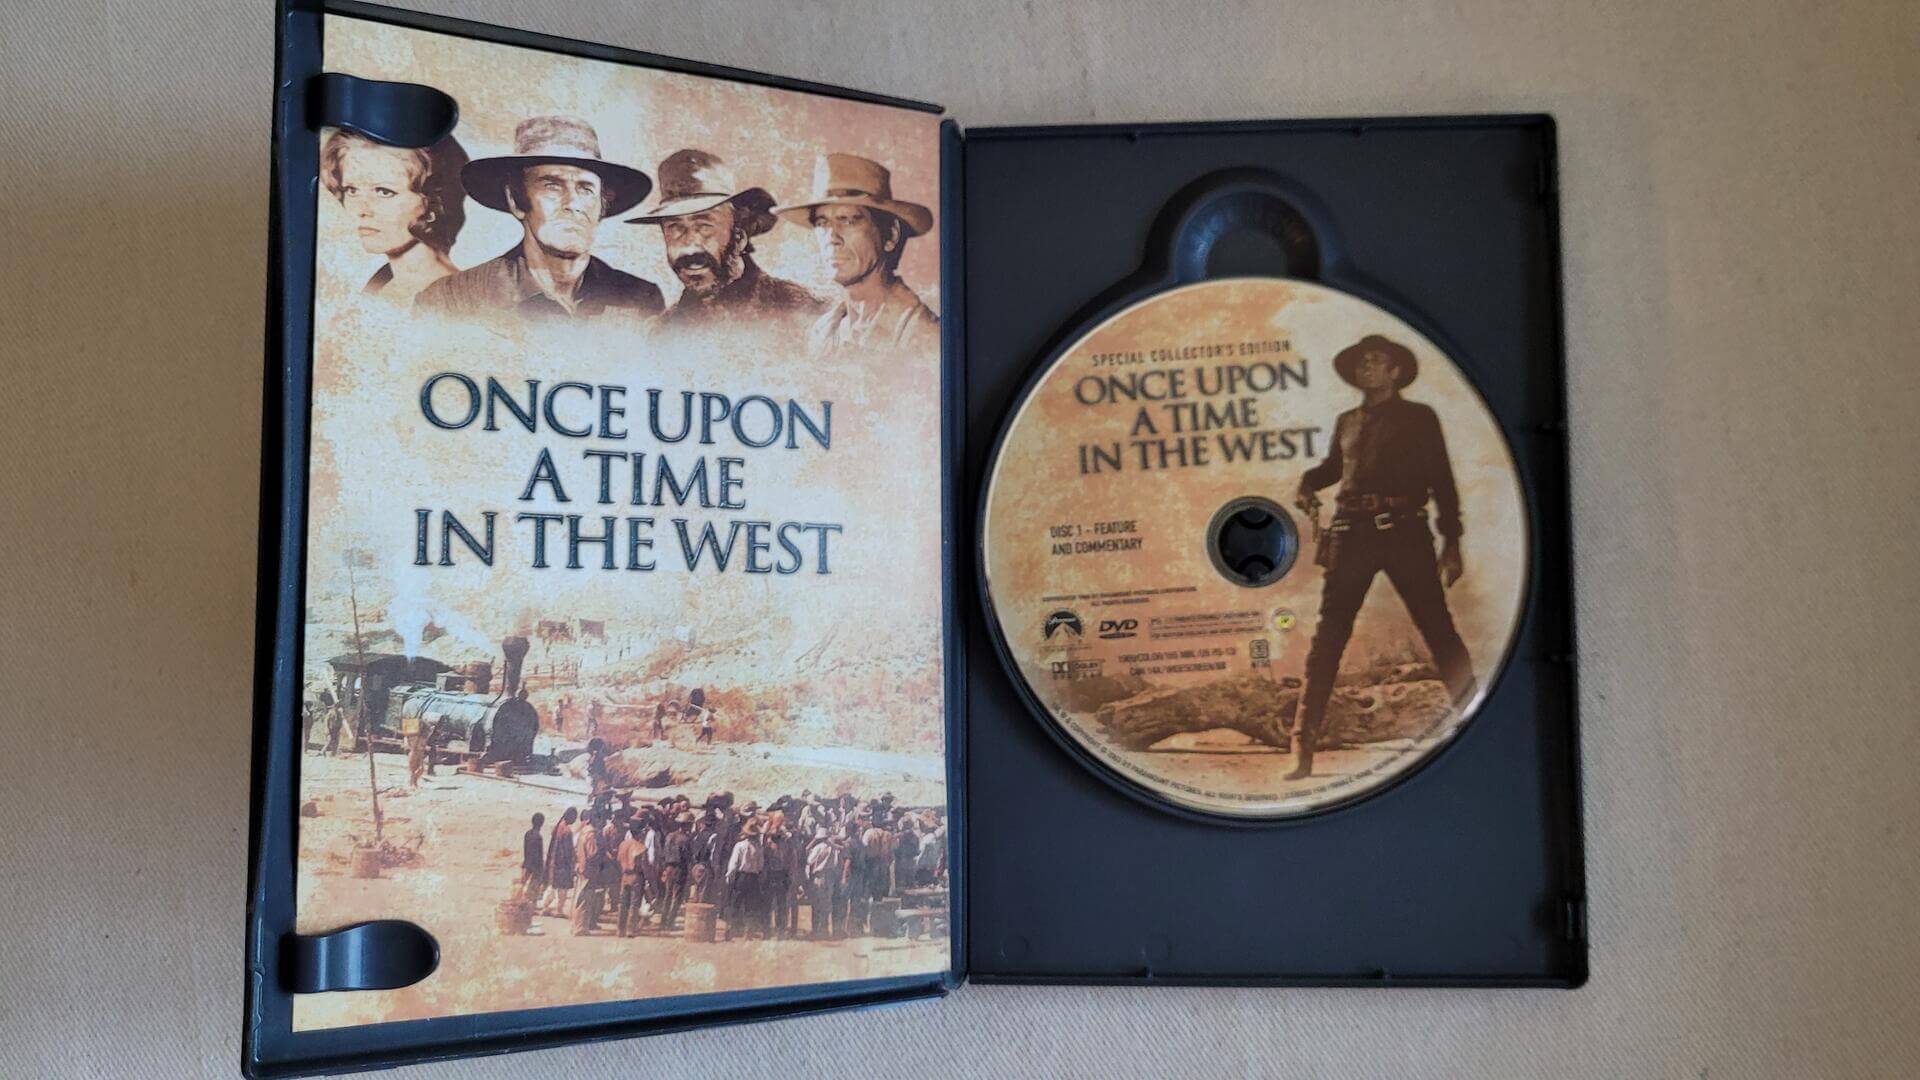 Once Upon a Time in the West, 1968 epic spaghetti western movie directed by Sergio Leone. Special collector's edition DVD 2 disc set